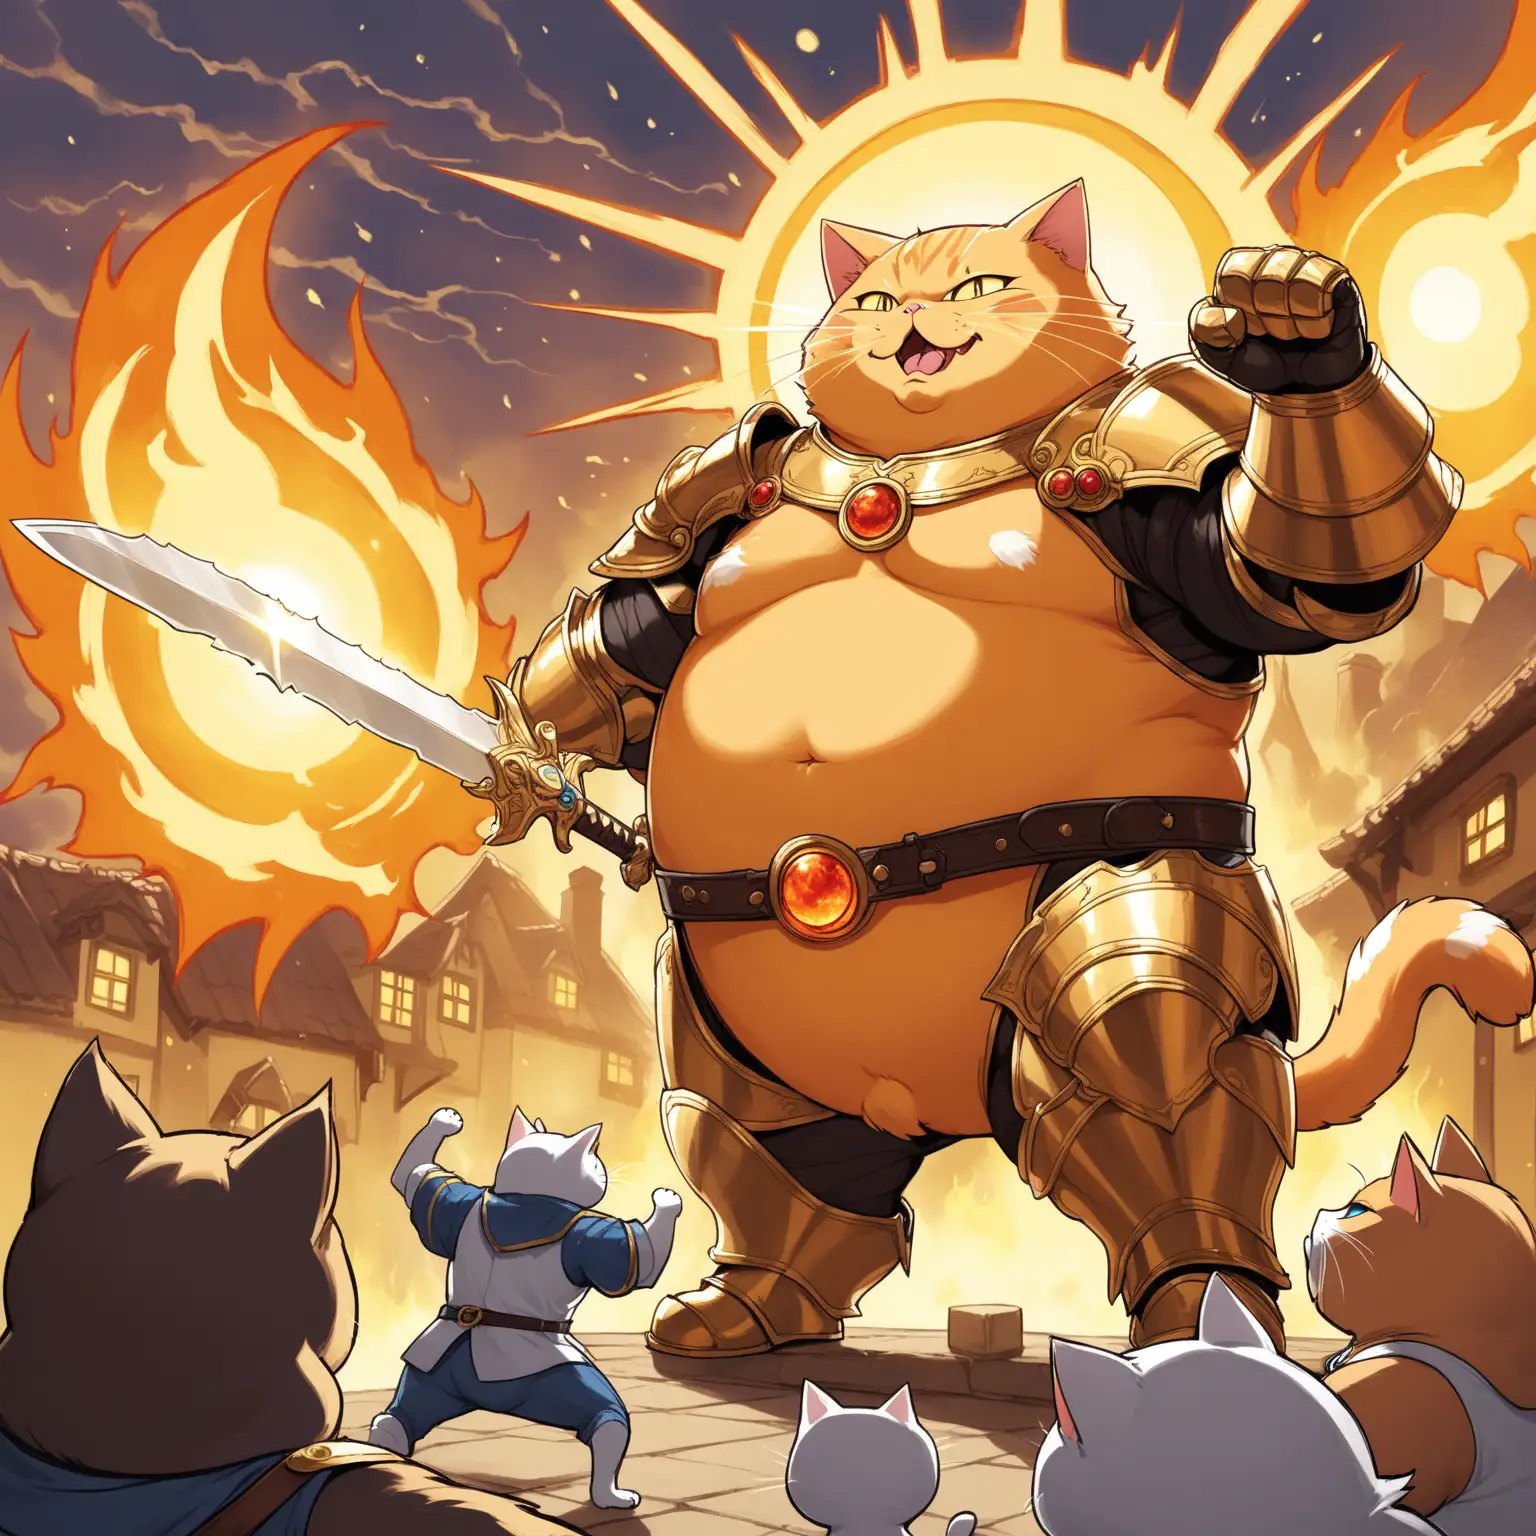 Mordenkainen the blonde cat warrior strikes a mighty battle pose against the sunspirit flame. The fat chubby warriors holds his sword aloft pointed at the evil sun spark ghost. His leather armor barely covers his bulgin belly. The bright spark glares angrily at the catperson. This epic battle for kitchen window supremacy will be told for ages